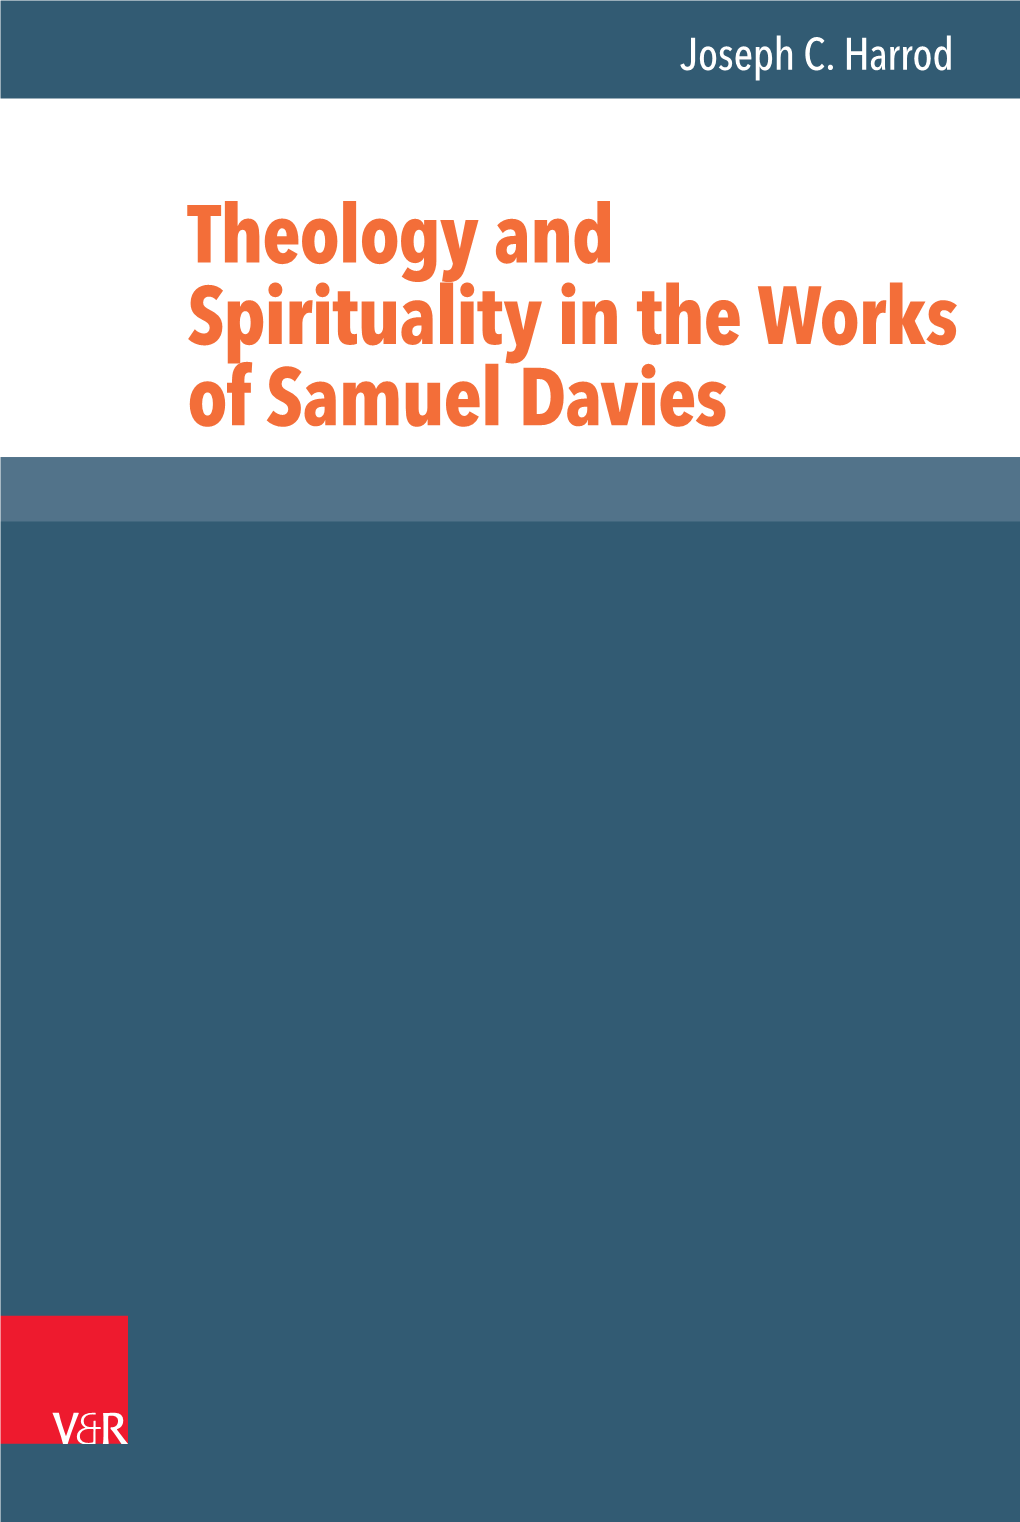 Theology and Spirituality in the Works of Samuel Davies of Samuel the Works in Spirituality and Theology